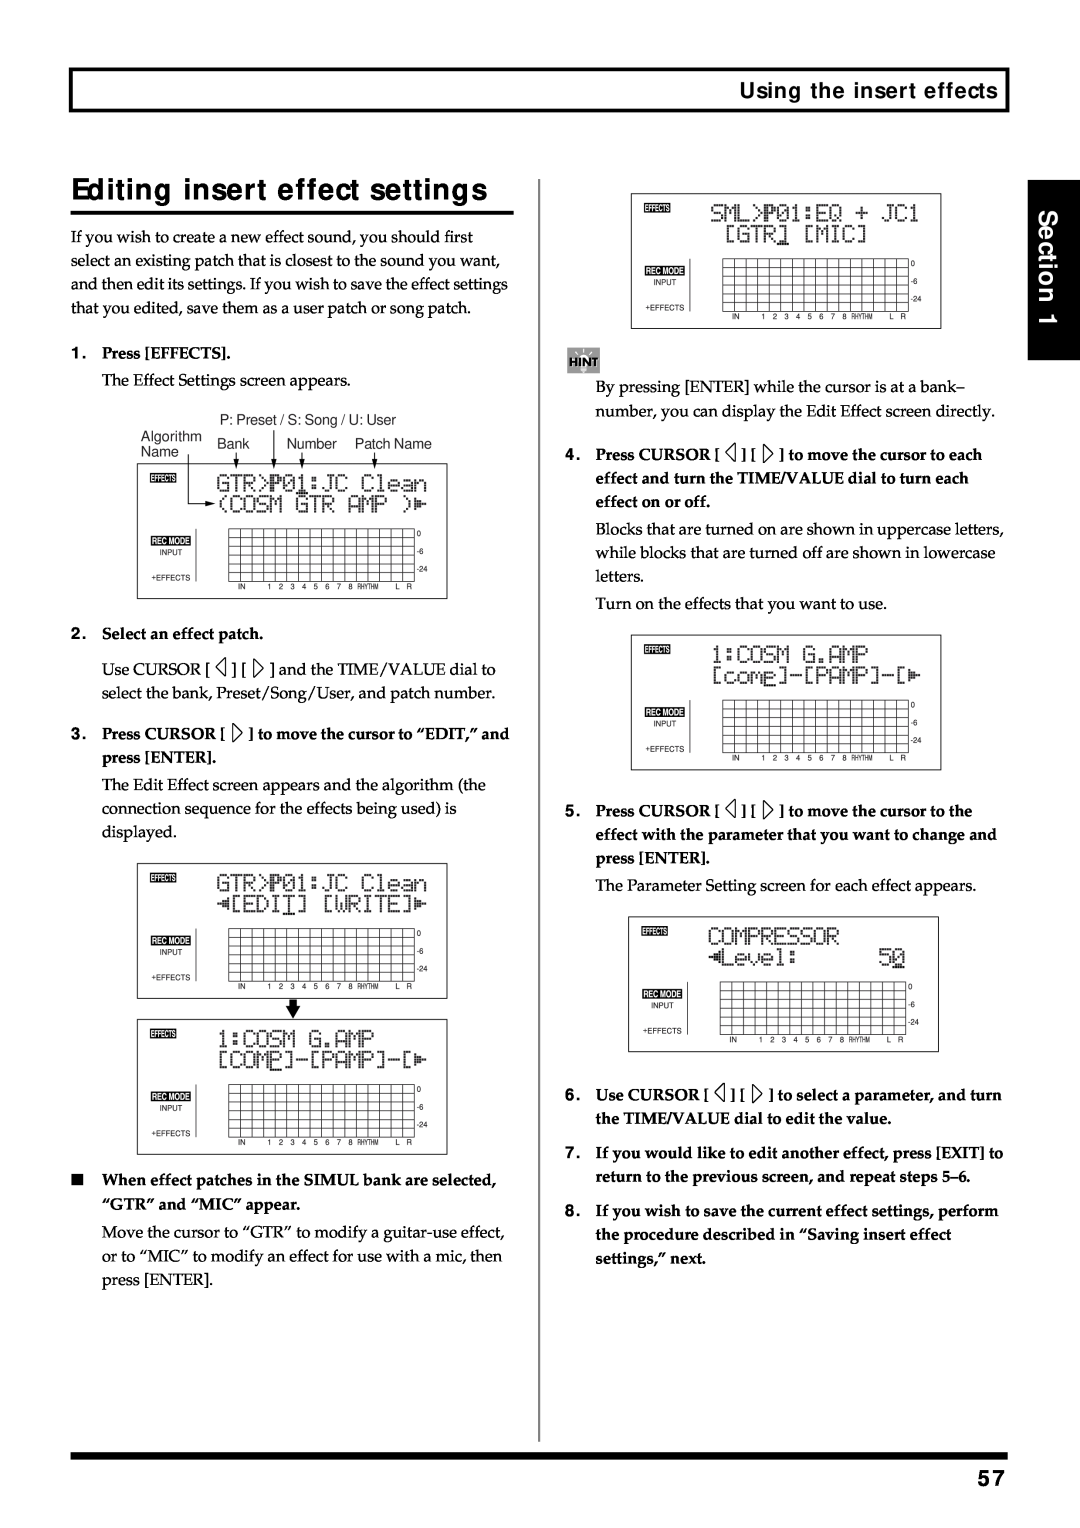 Roland BR-864 owner manual Editing insert effect settings, Section, Using the insert effects 